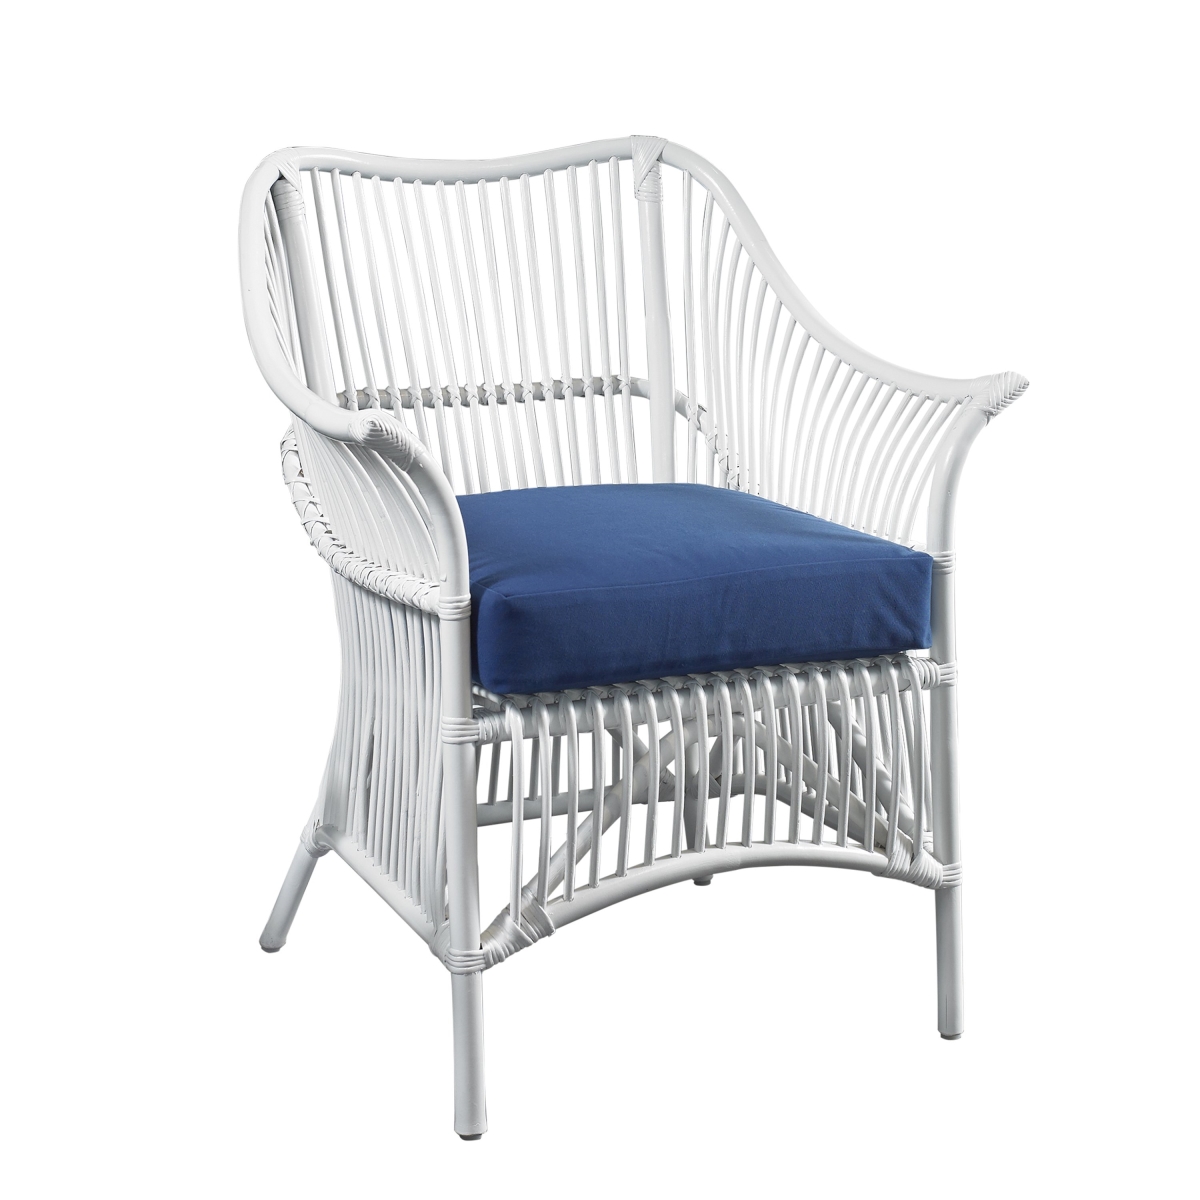 Plm01-wht-nav Palm Occasional Chair, White & Navy - 27.16 X 25.8 X 34.64 In.